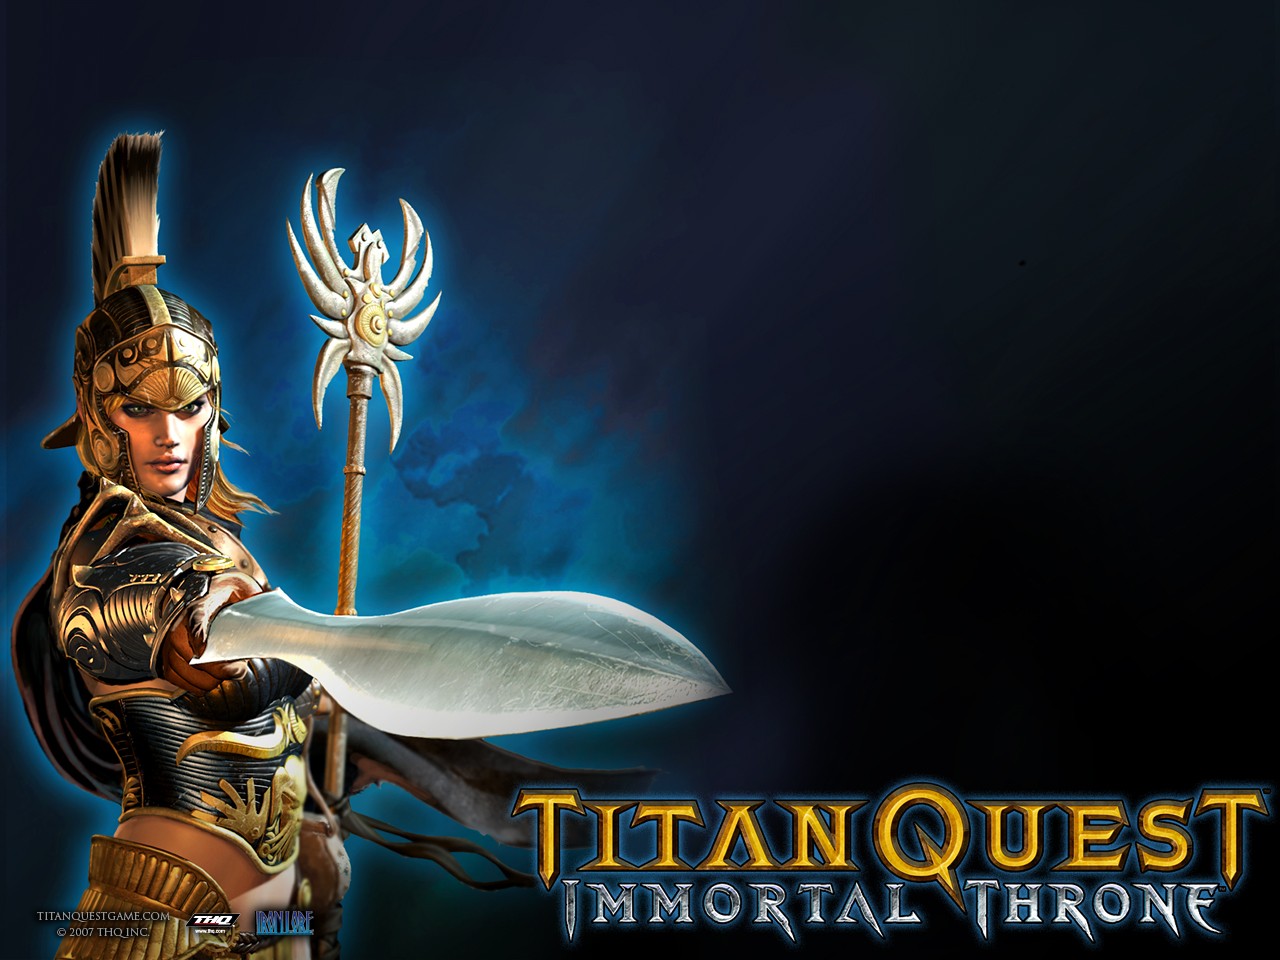 General 1280x960 video games Titan Quest fantasy art PC gaming 2007 (Year) armor staff sword weapon video game girls women with swords blue background